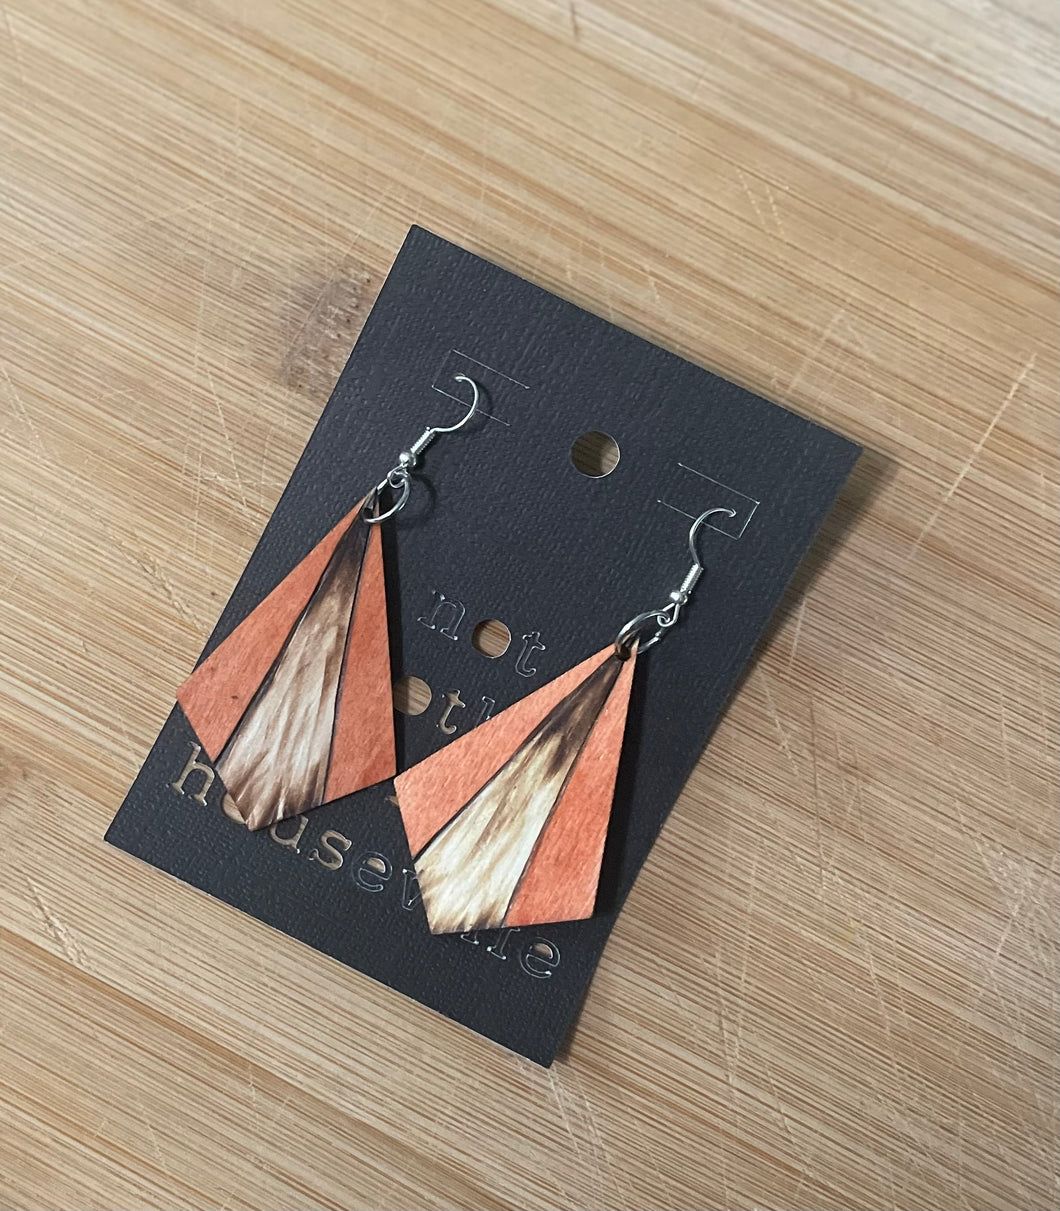 Orange Wooden and Hand Painted  Burnt Earring